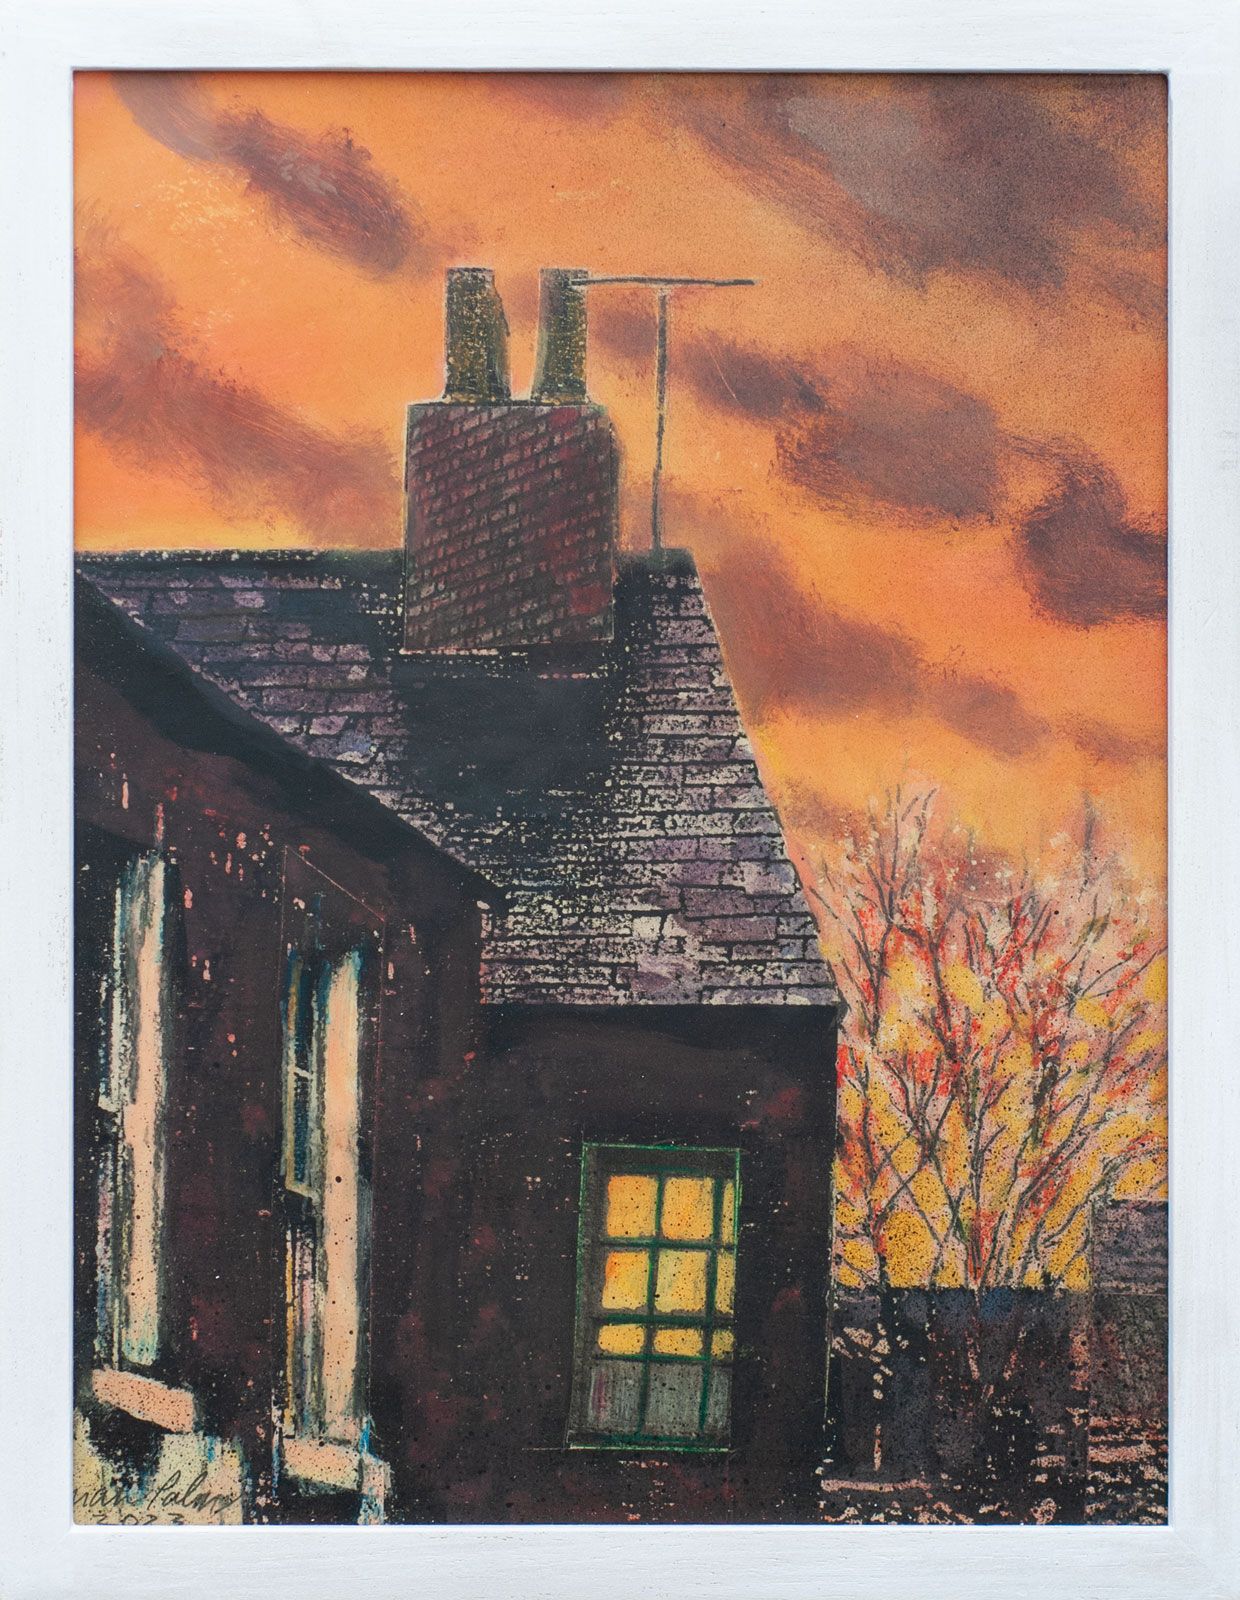 Artist House with Flaming Sky by Brian Palm